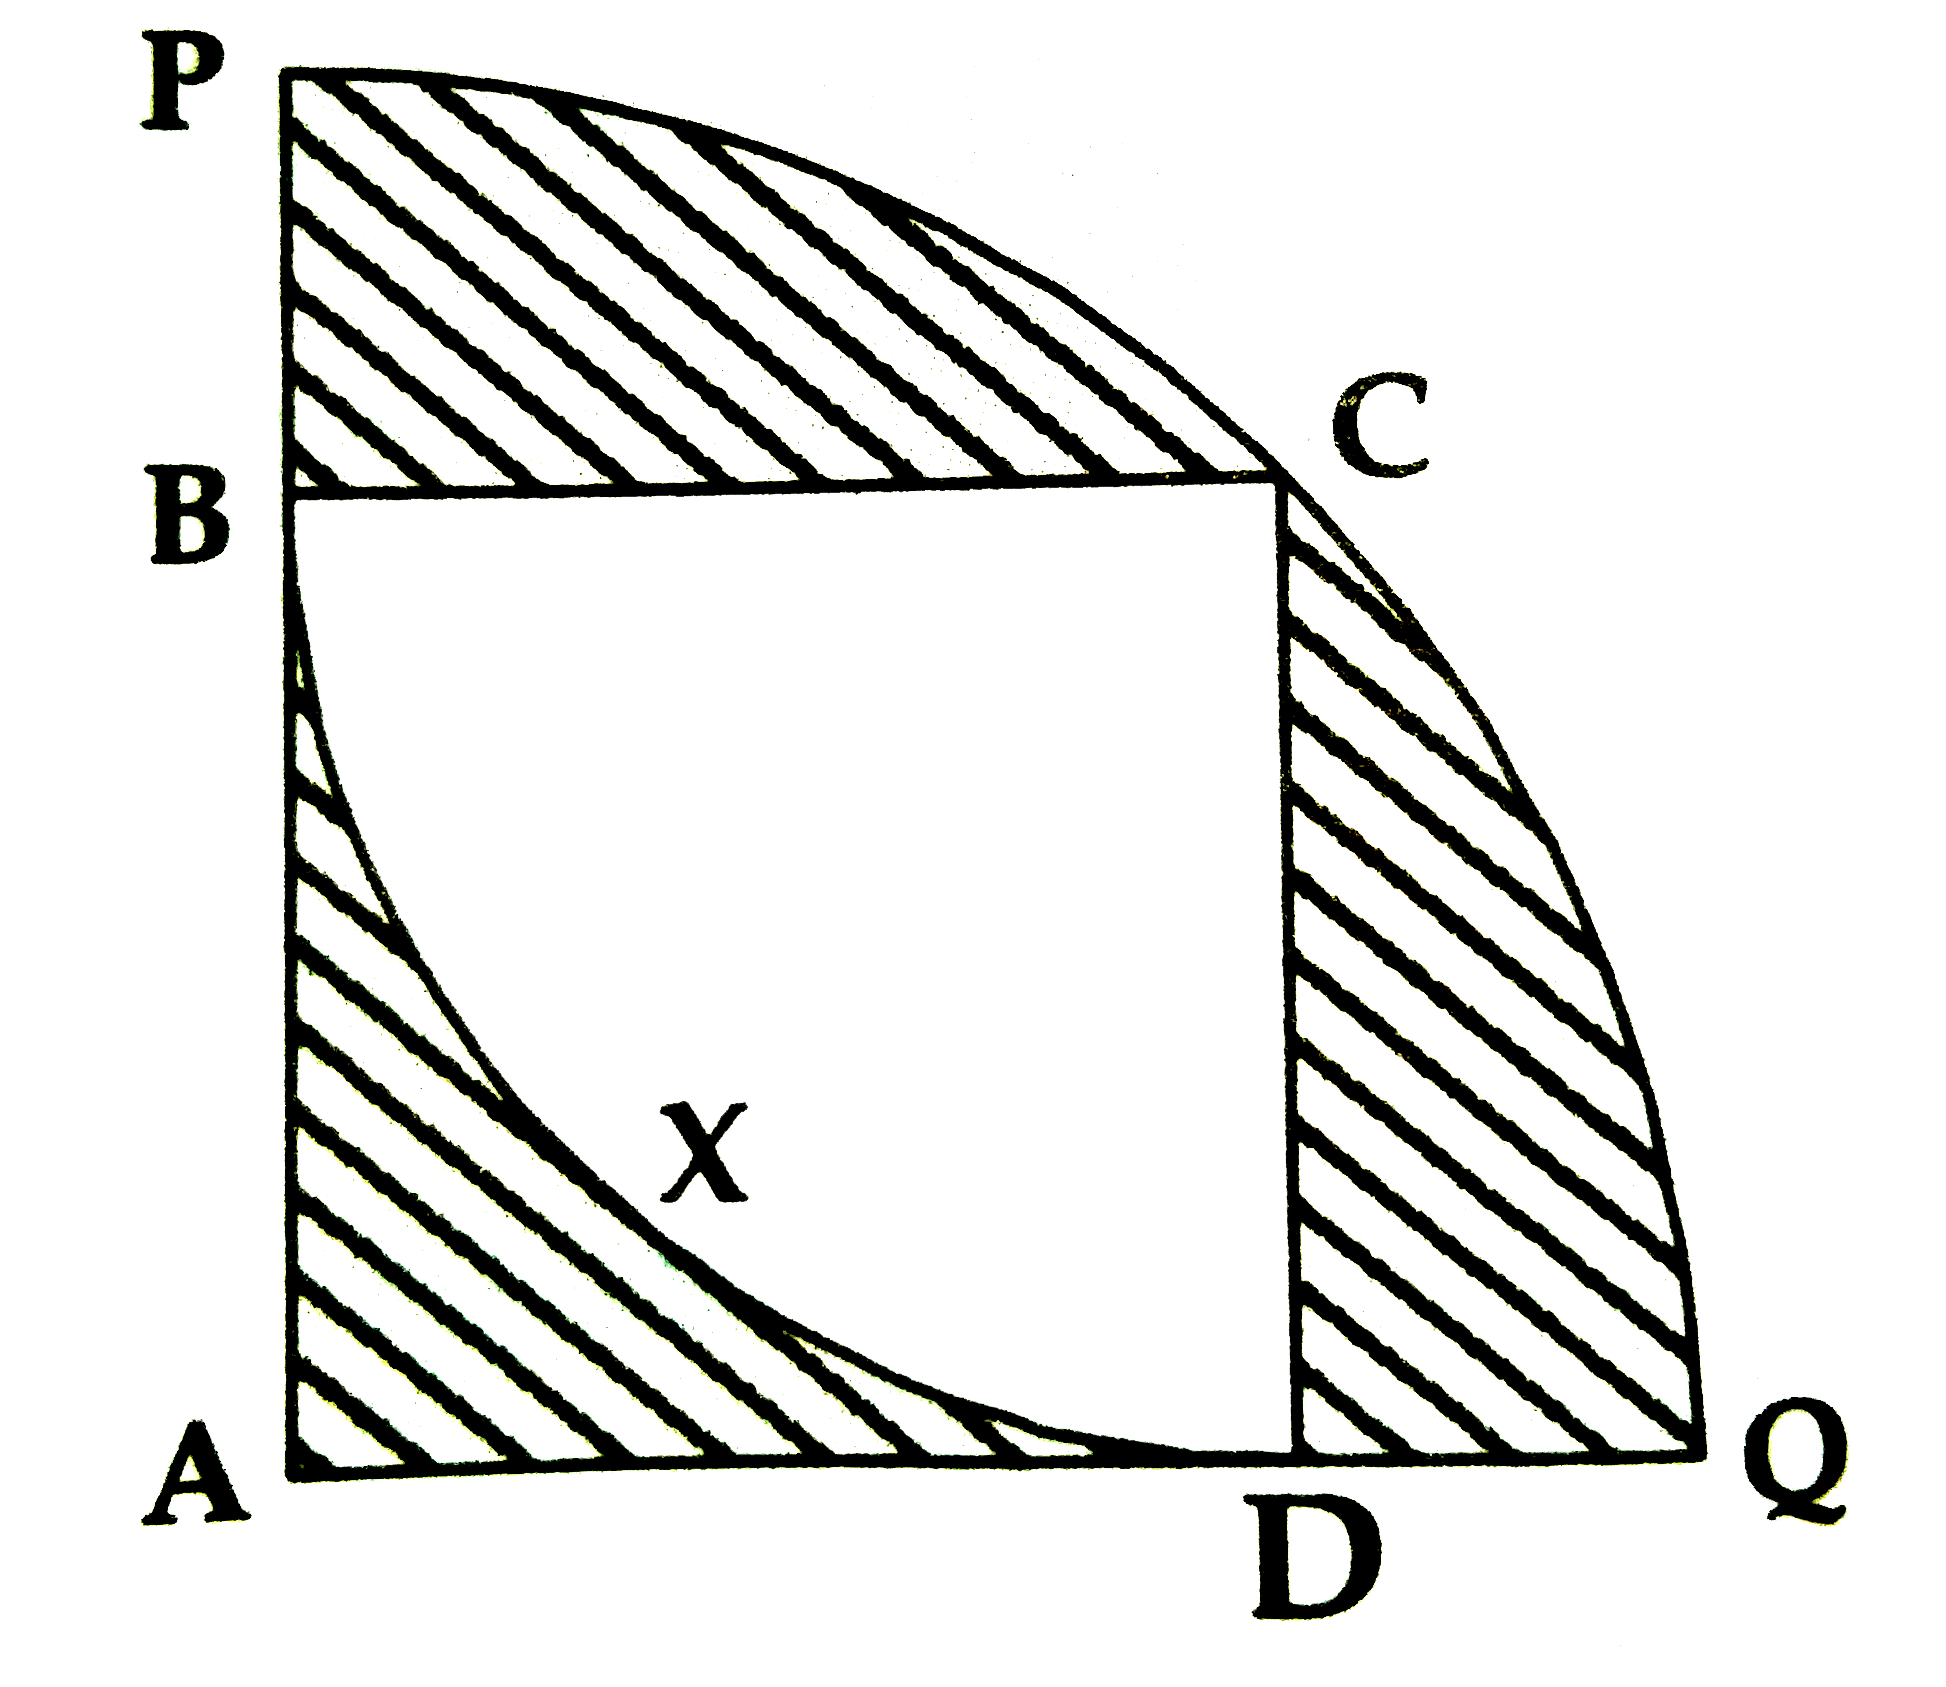 In the following figure, square ABCD is inscribed in the sector C-BXD IS 20 cm. Complete the following activity to find the area of shaded region